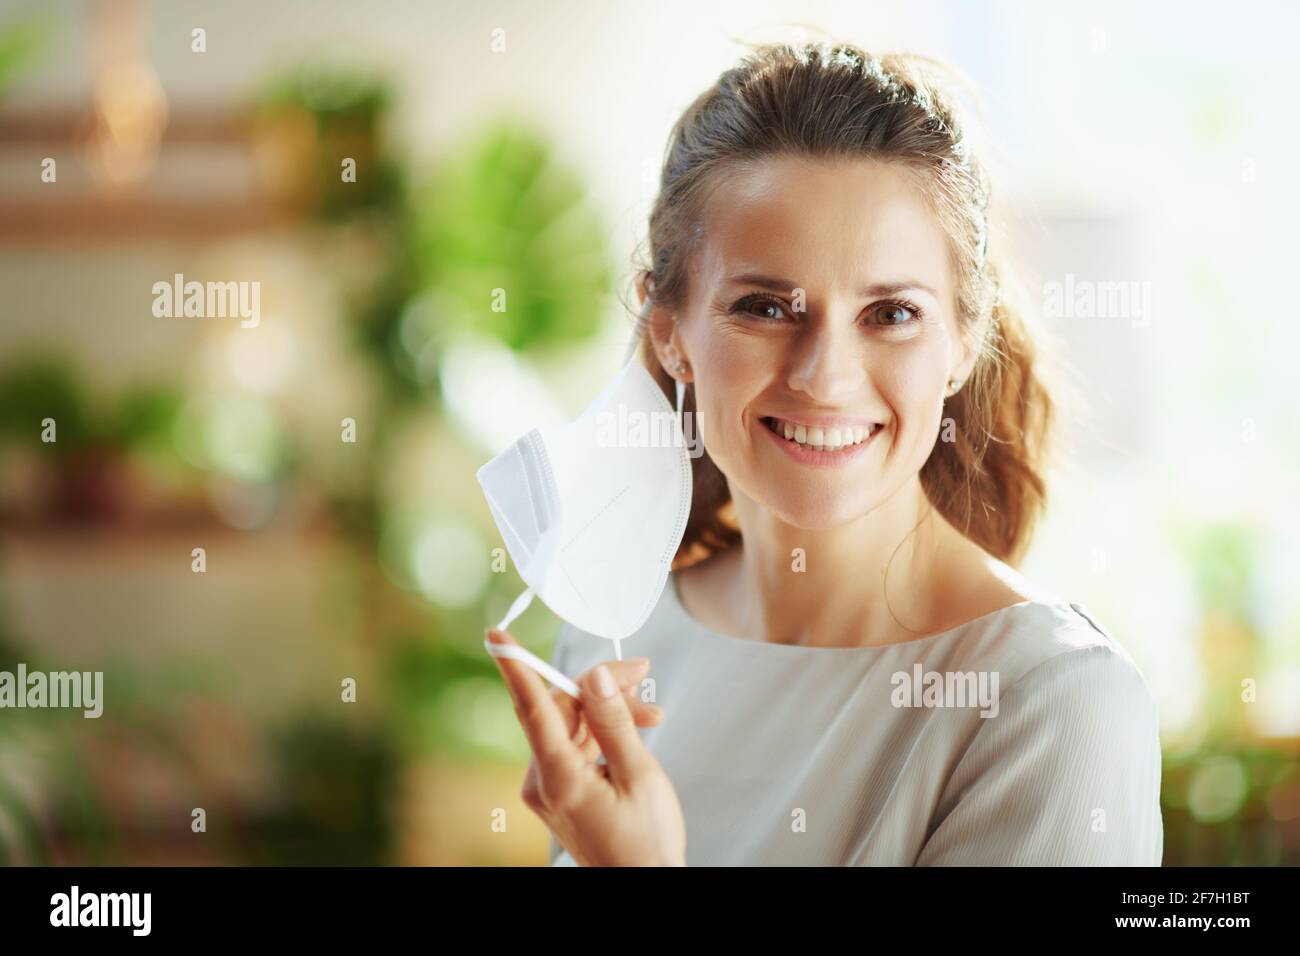 covid-19 pandemic. Portrait of smiling elegant woman in grey blouse taking off ffp2 mask. Stock Photo